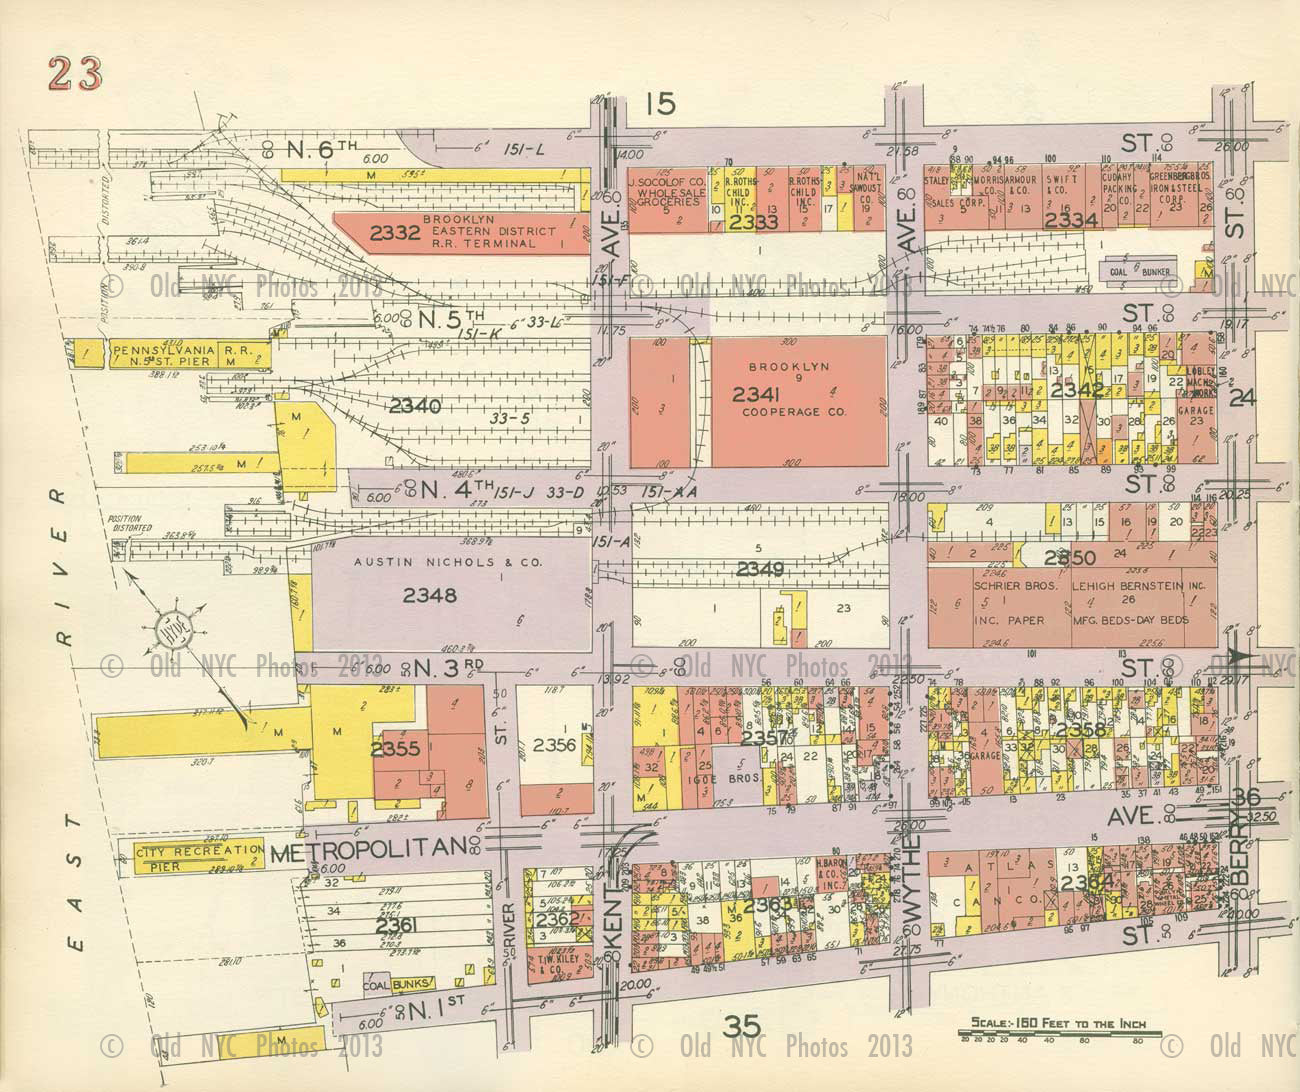 Map of Willamsburg Old Vintage Photos and Images